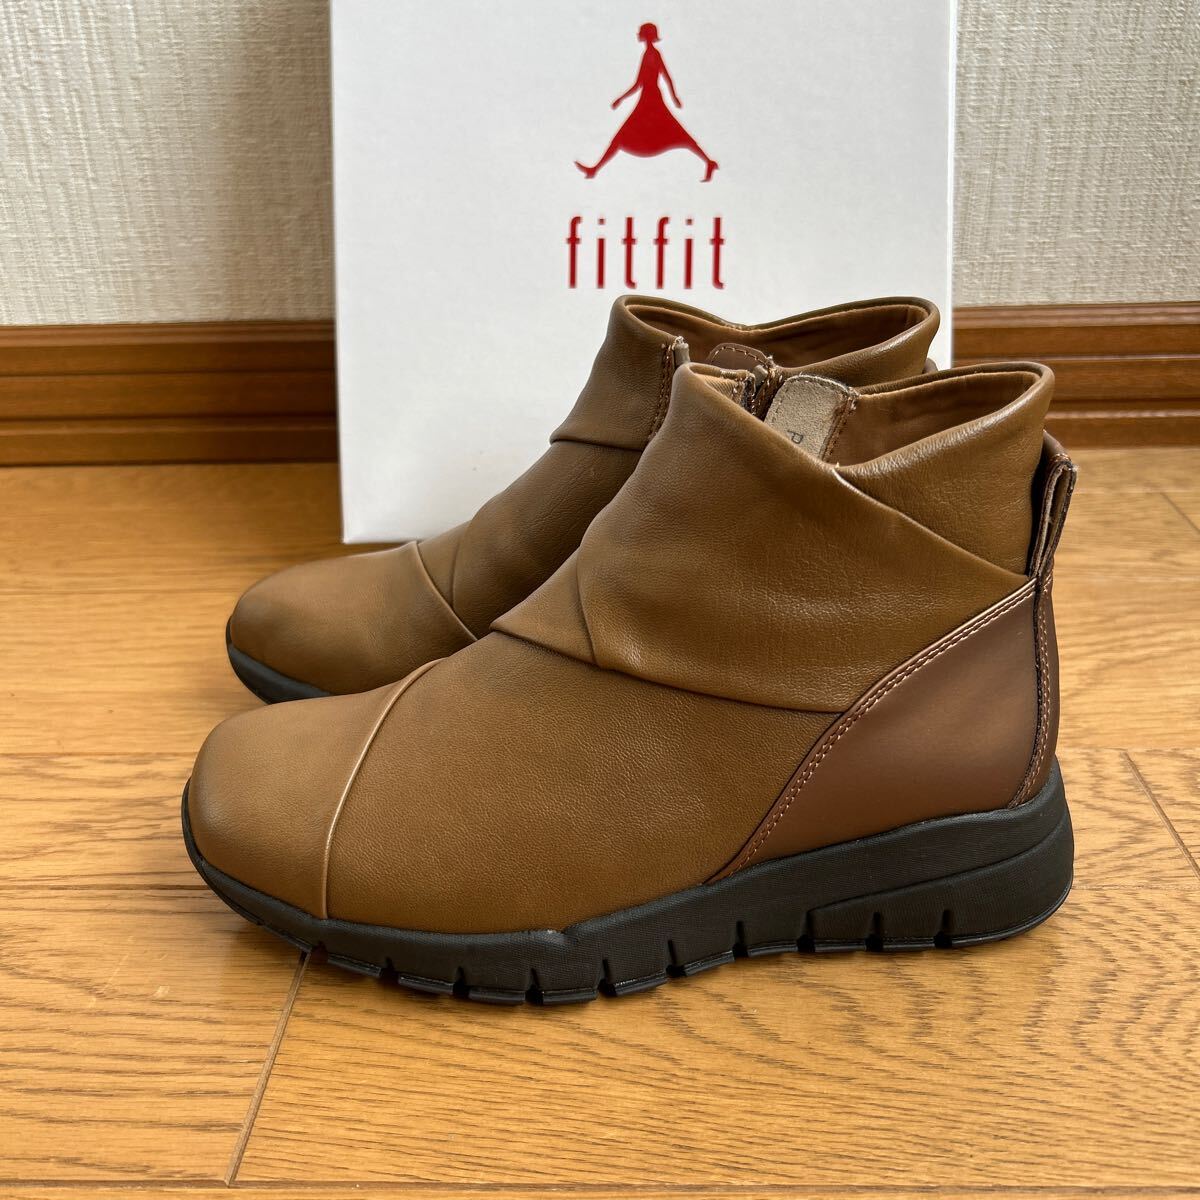 fitfit Fit Fit * Cross in step boots 23.0cm* regular price 11990 jpy * light brown * side hook and loop fastener soft body * short boots 